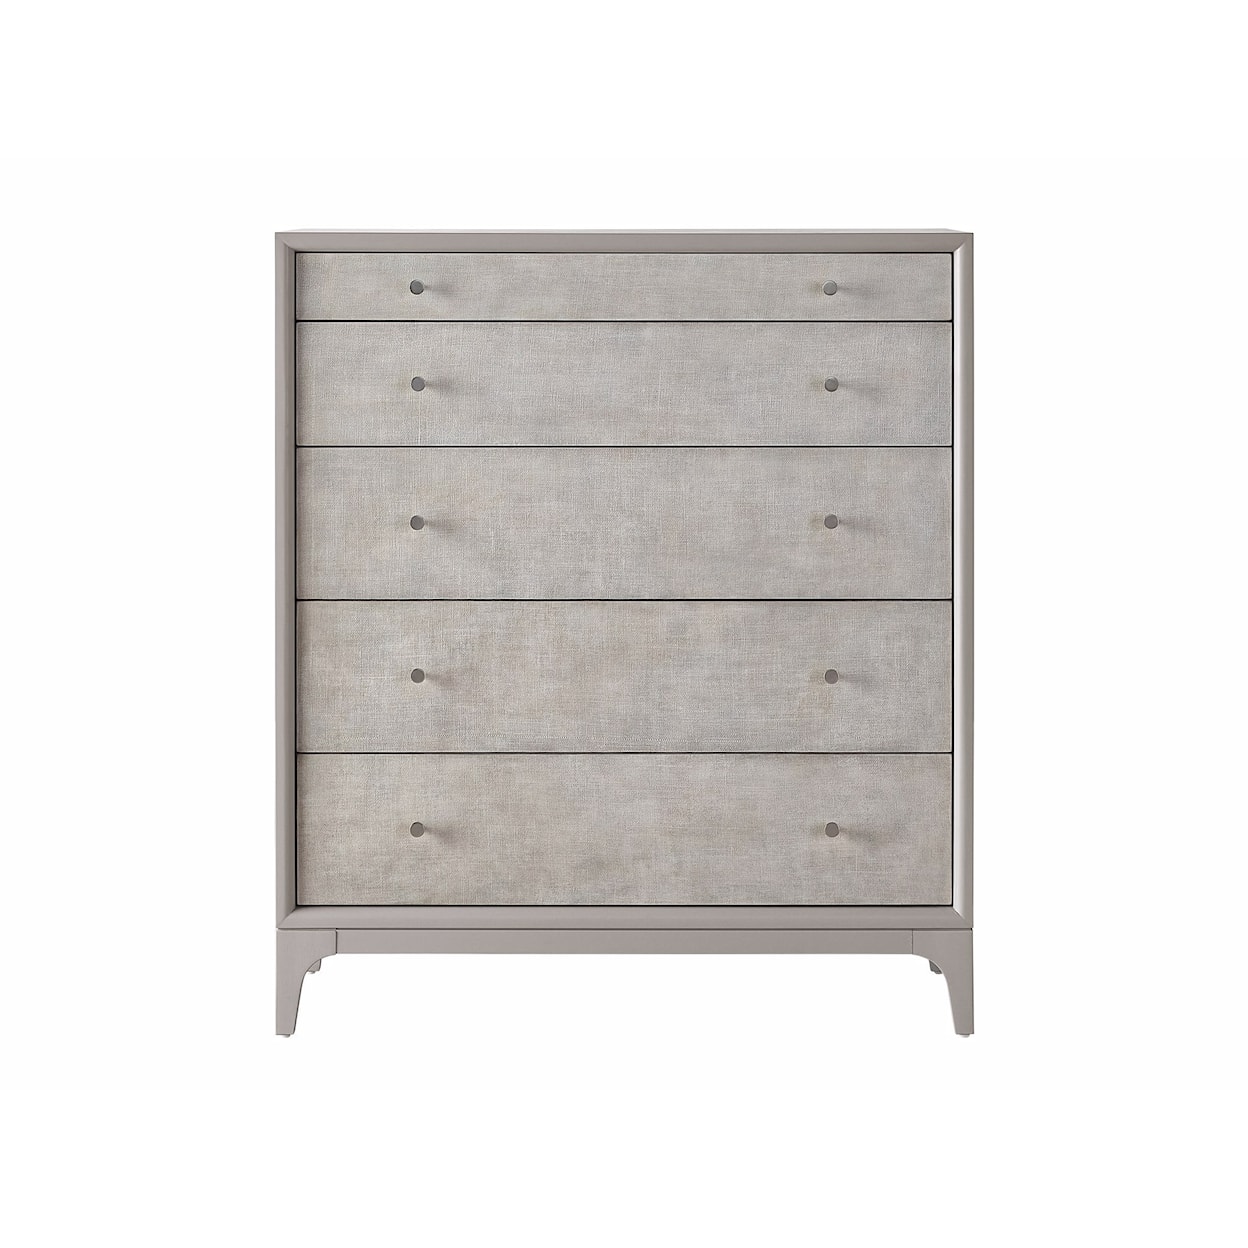 Universal Tranquility - Miranda Kerr Home Tranquility Chest